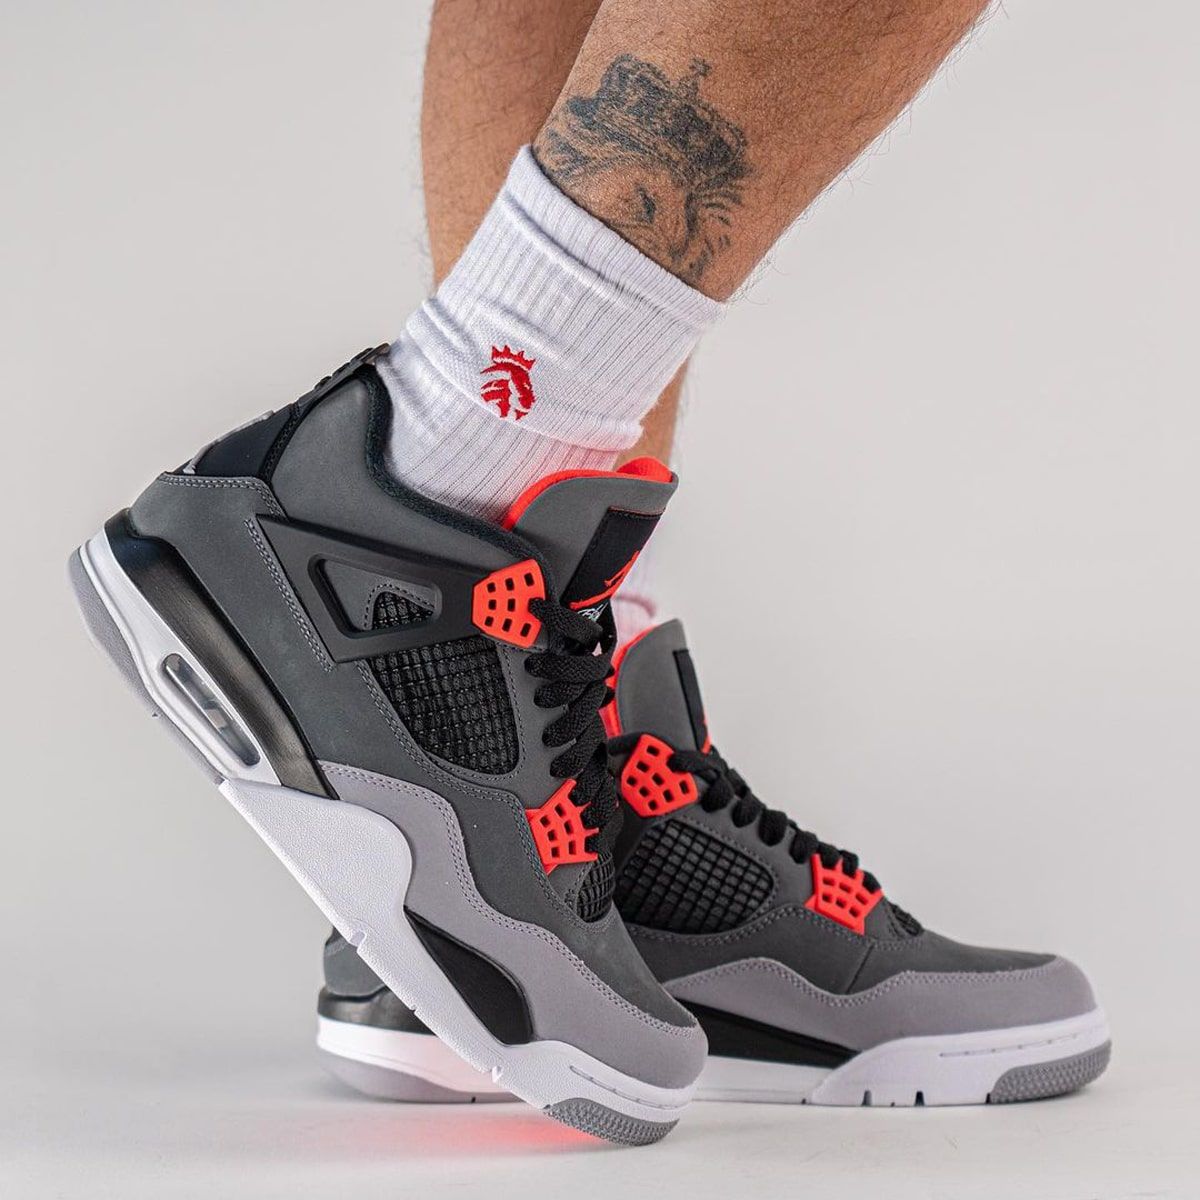 Infrared' Air Jordan 4s Are Officially Releasing in June